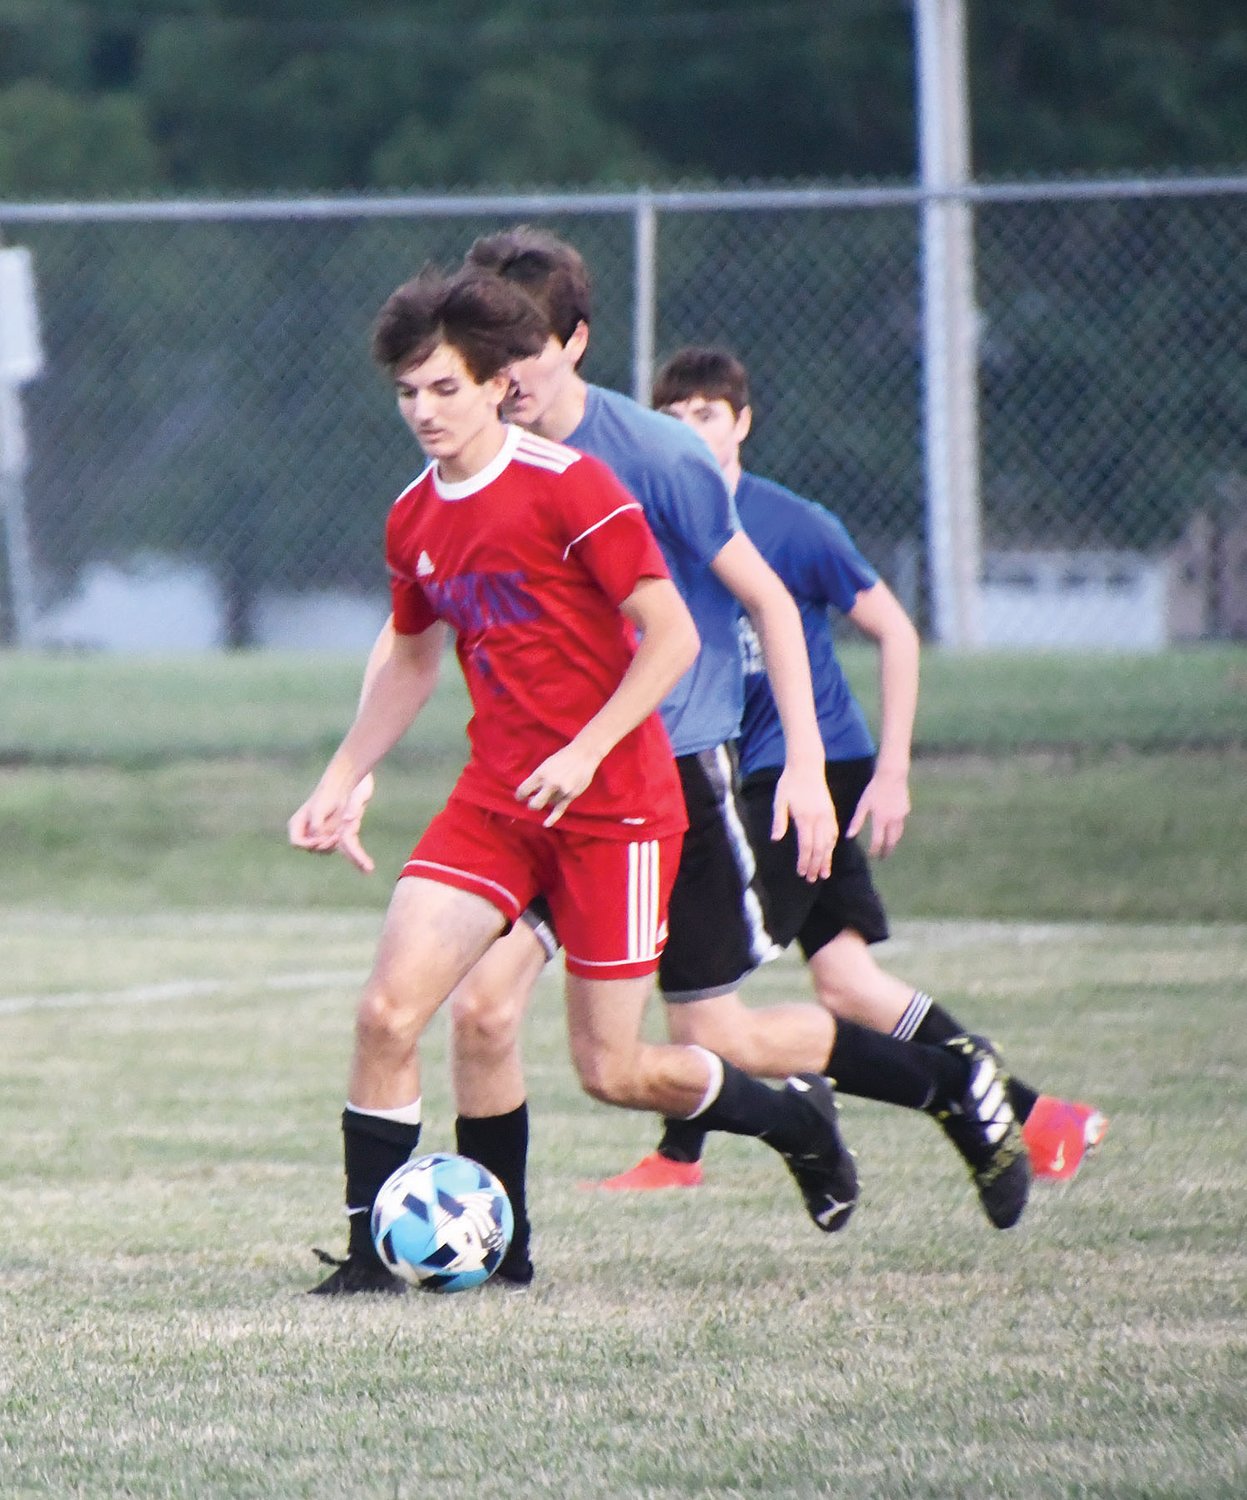 Spartan soccer player Jordan Rasico (red jersey) dribbles with the ball while a pair of Boonville players trail him during a showcase scrimmage on Wednesday, July 27, at Moberly High School.